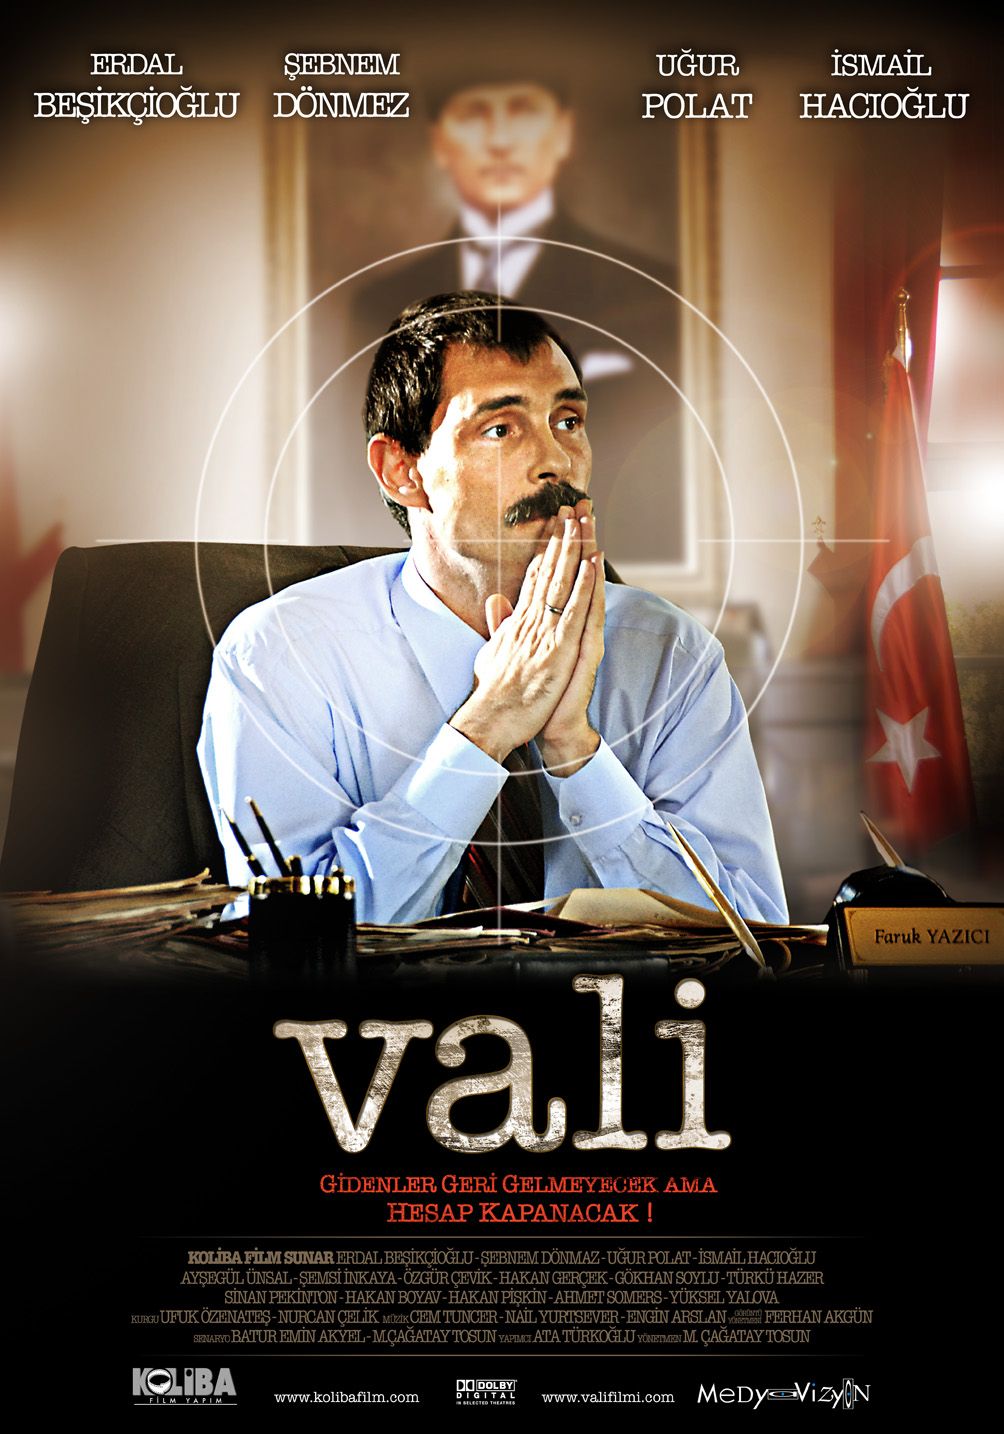 Extra Large Movie Poster Image for Vali 